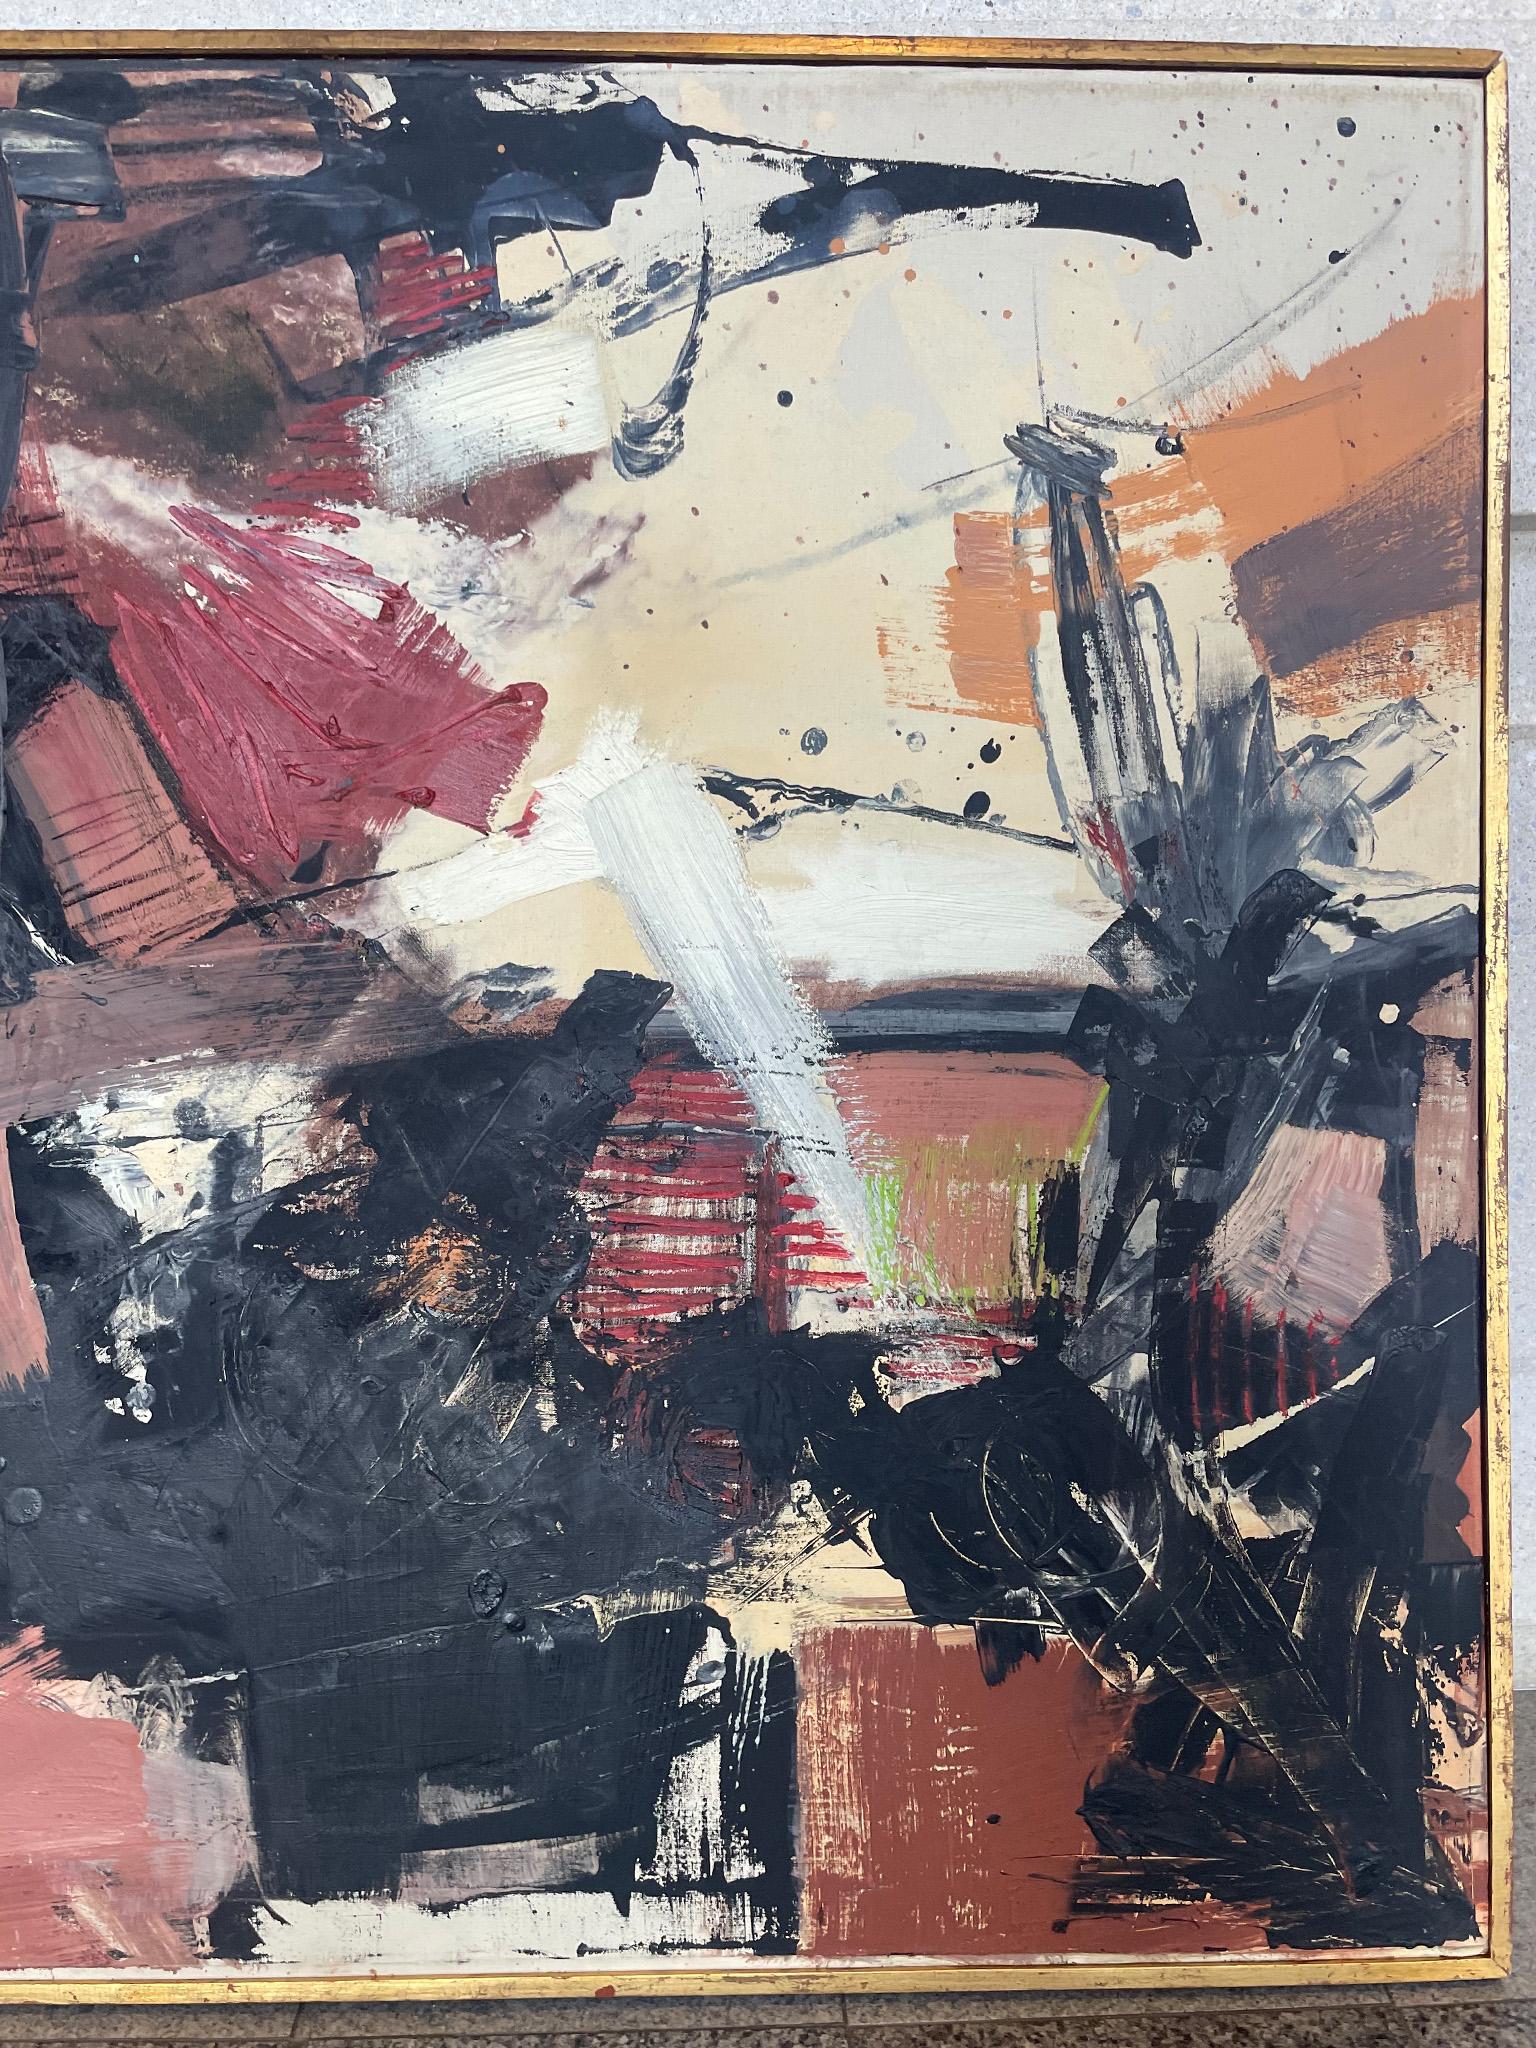 Mia Blumenstock (American, ? – 2018)
Abstract Composition / “In Conflict”.
Unsigned and undated. 
Gallery label on verso. 
Oil on canvas. 

Dimensions:
40 in. Height
49 in. Width

Condition notes:
In good condition, with minor scuffs and